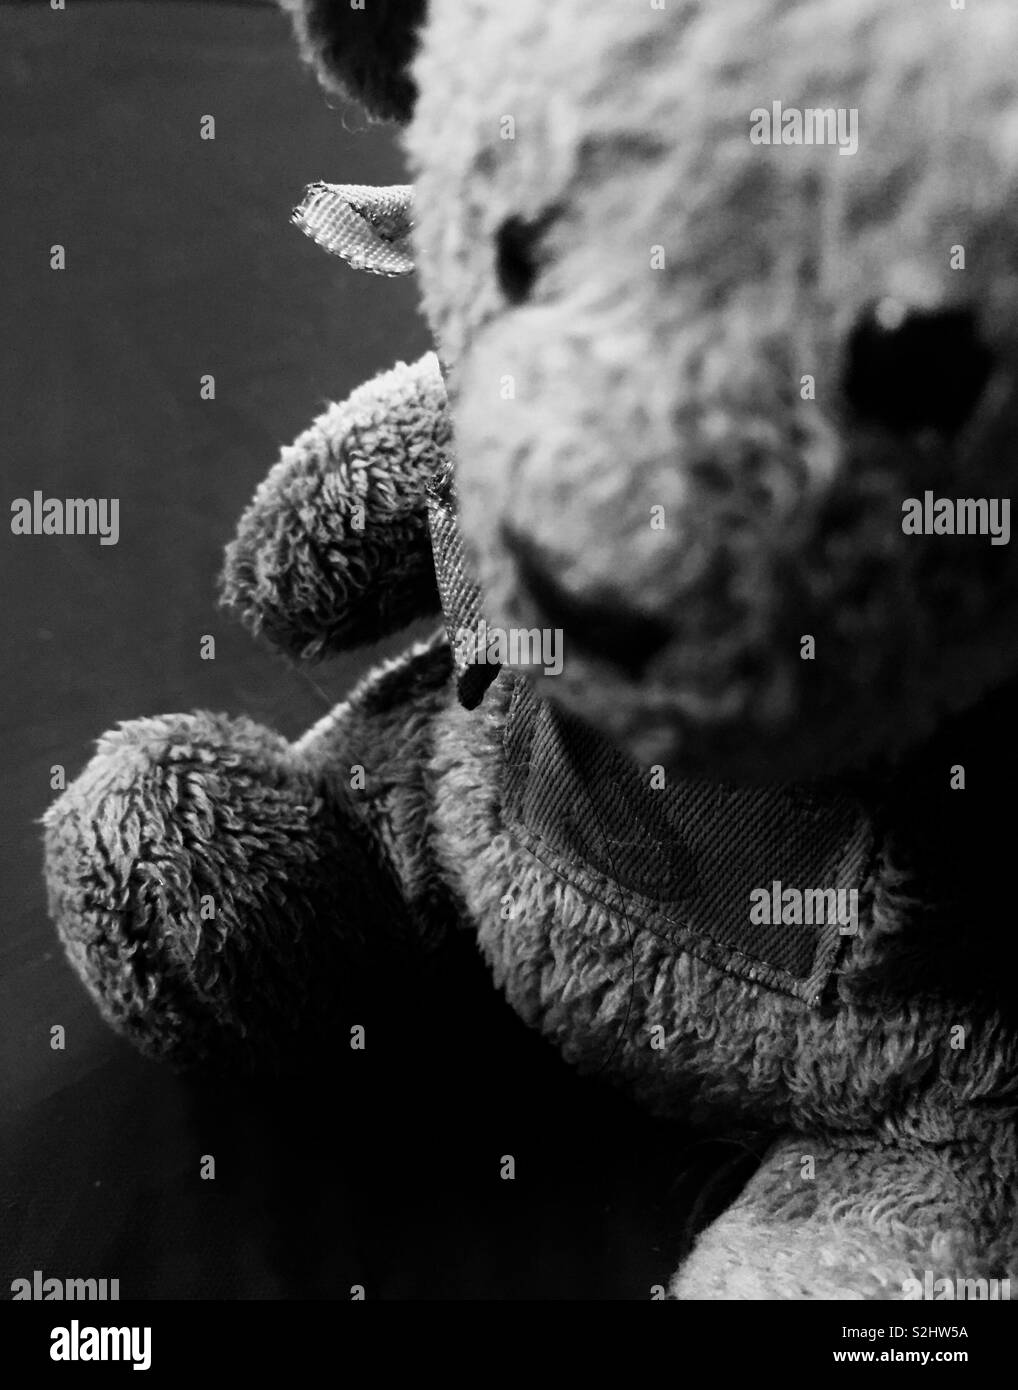 A solemn picture of a stuffed toy. Stock Photo